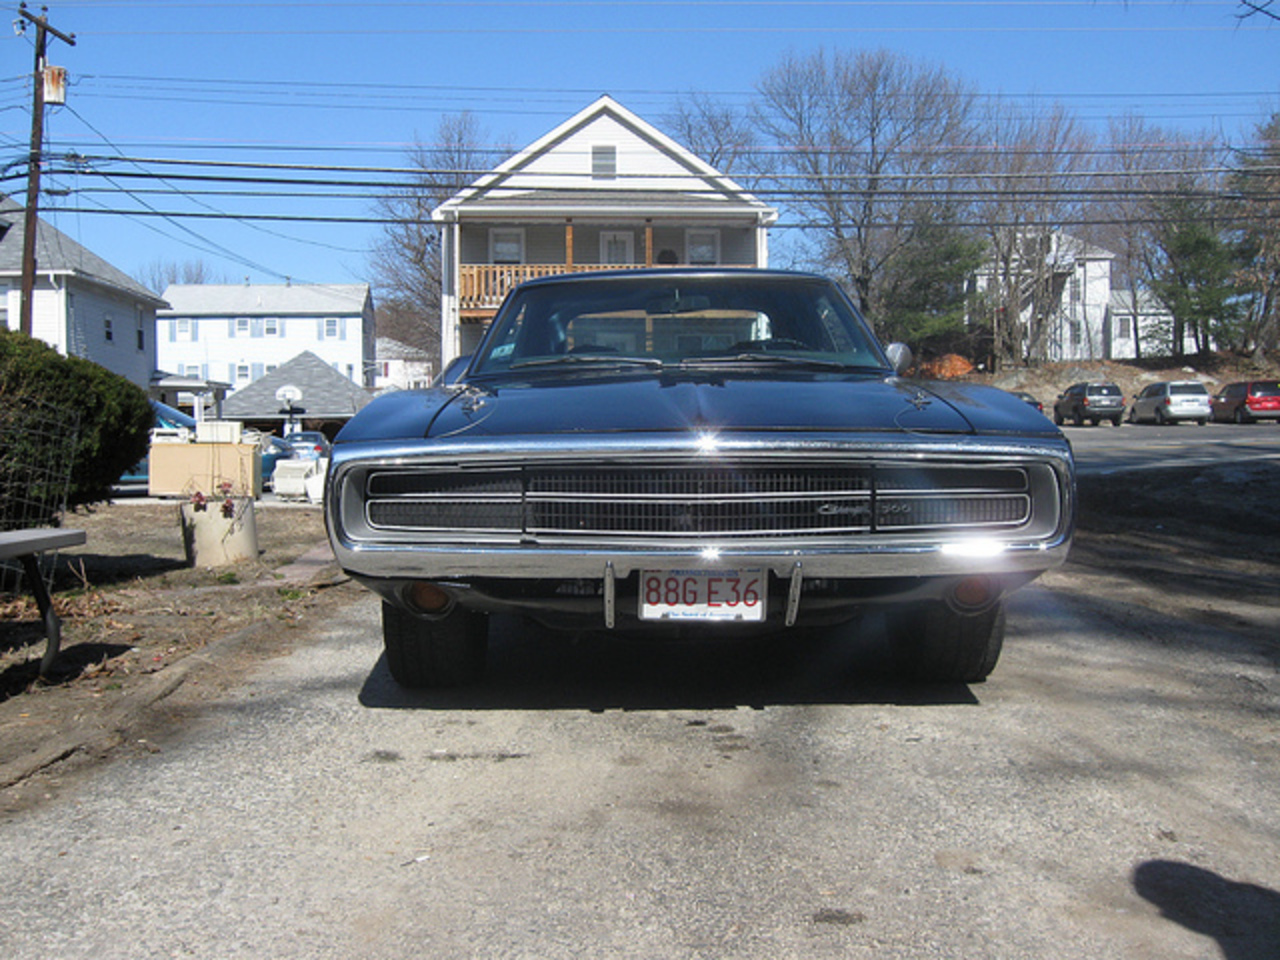 1970 Dodge Charger 500 (3) | Flickr - Photo Sharing!